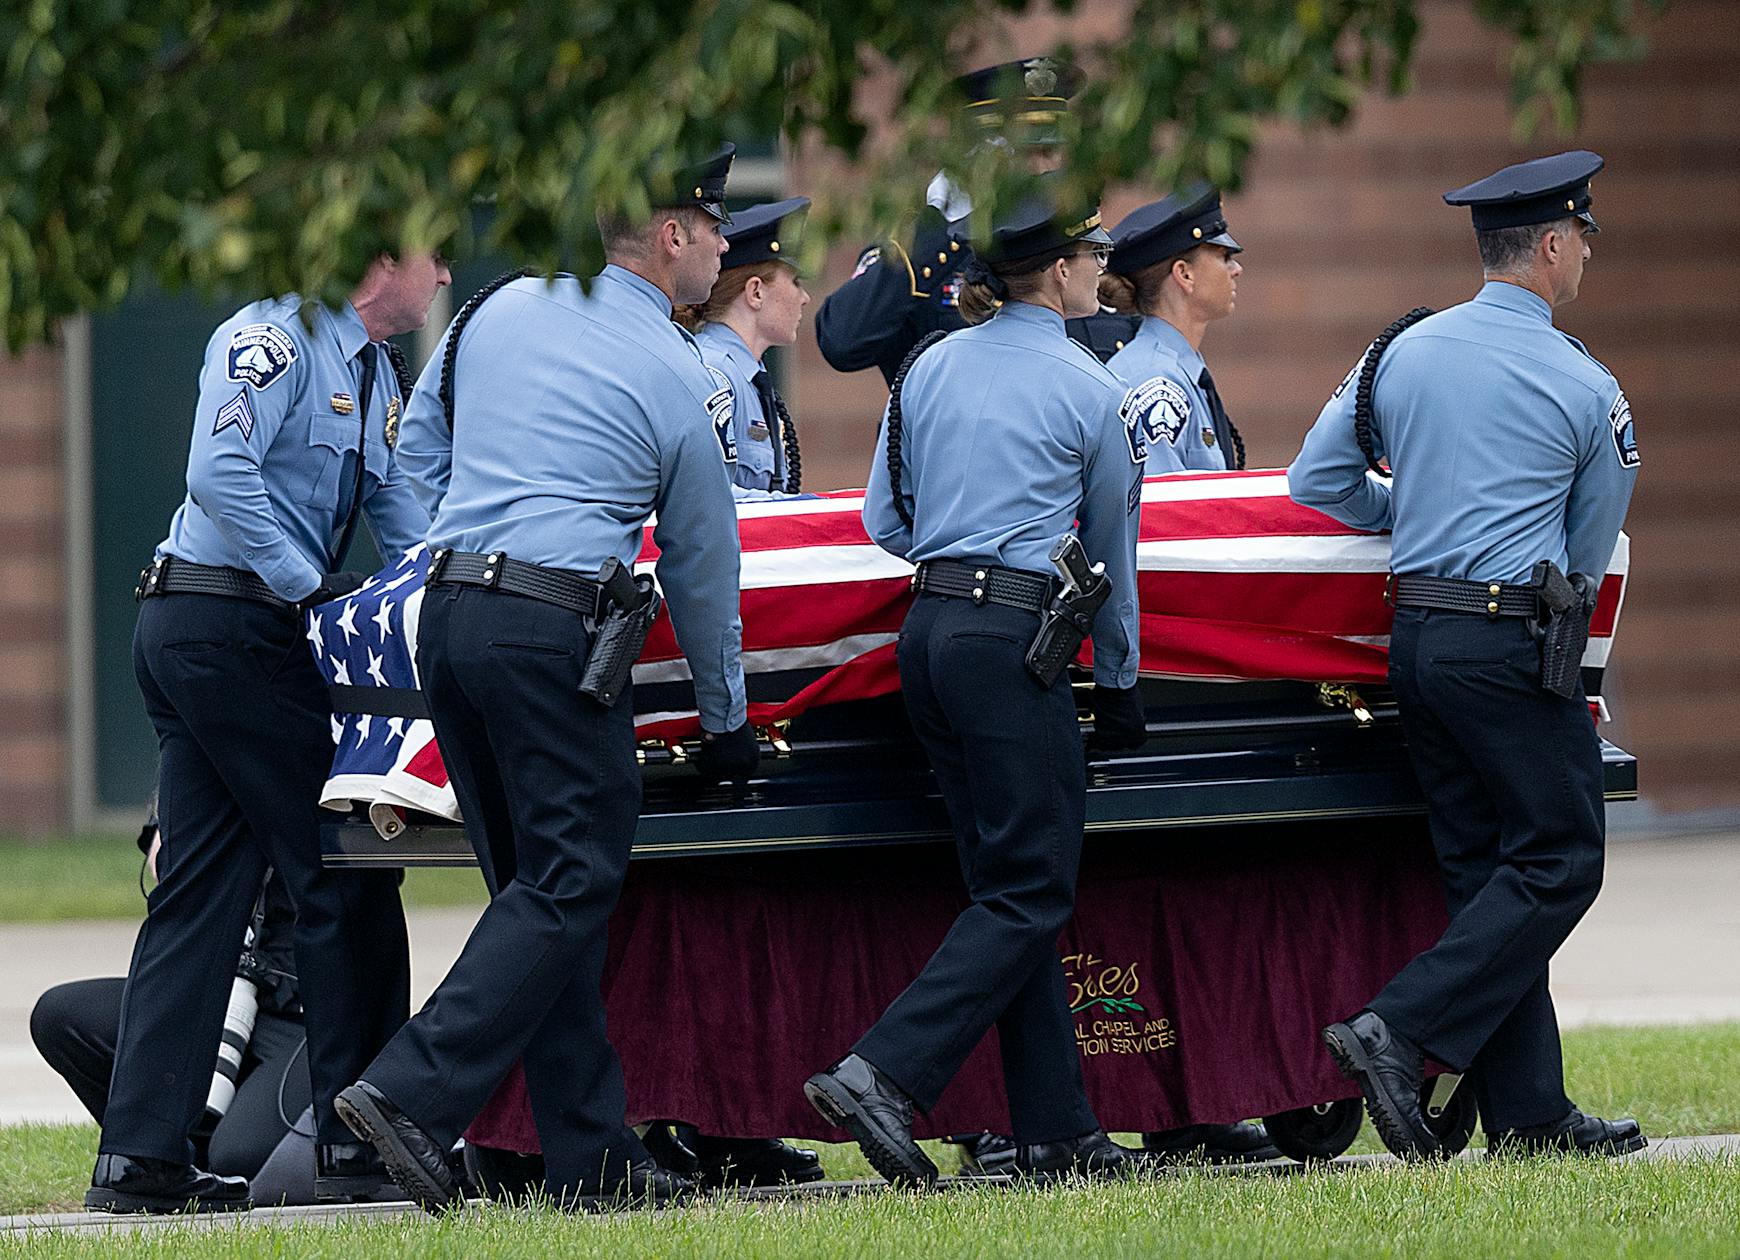 'The epitome of a guardian': Slain Minneapolis officer remembered for courage, empathy